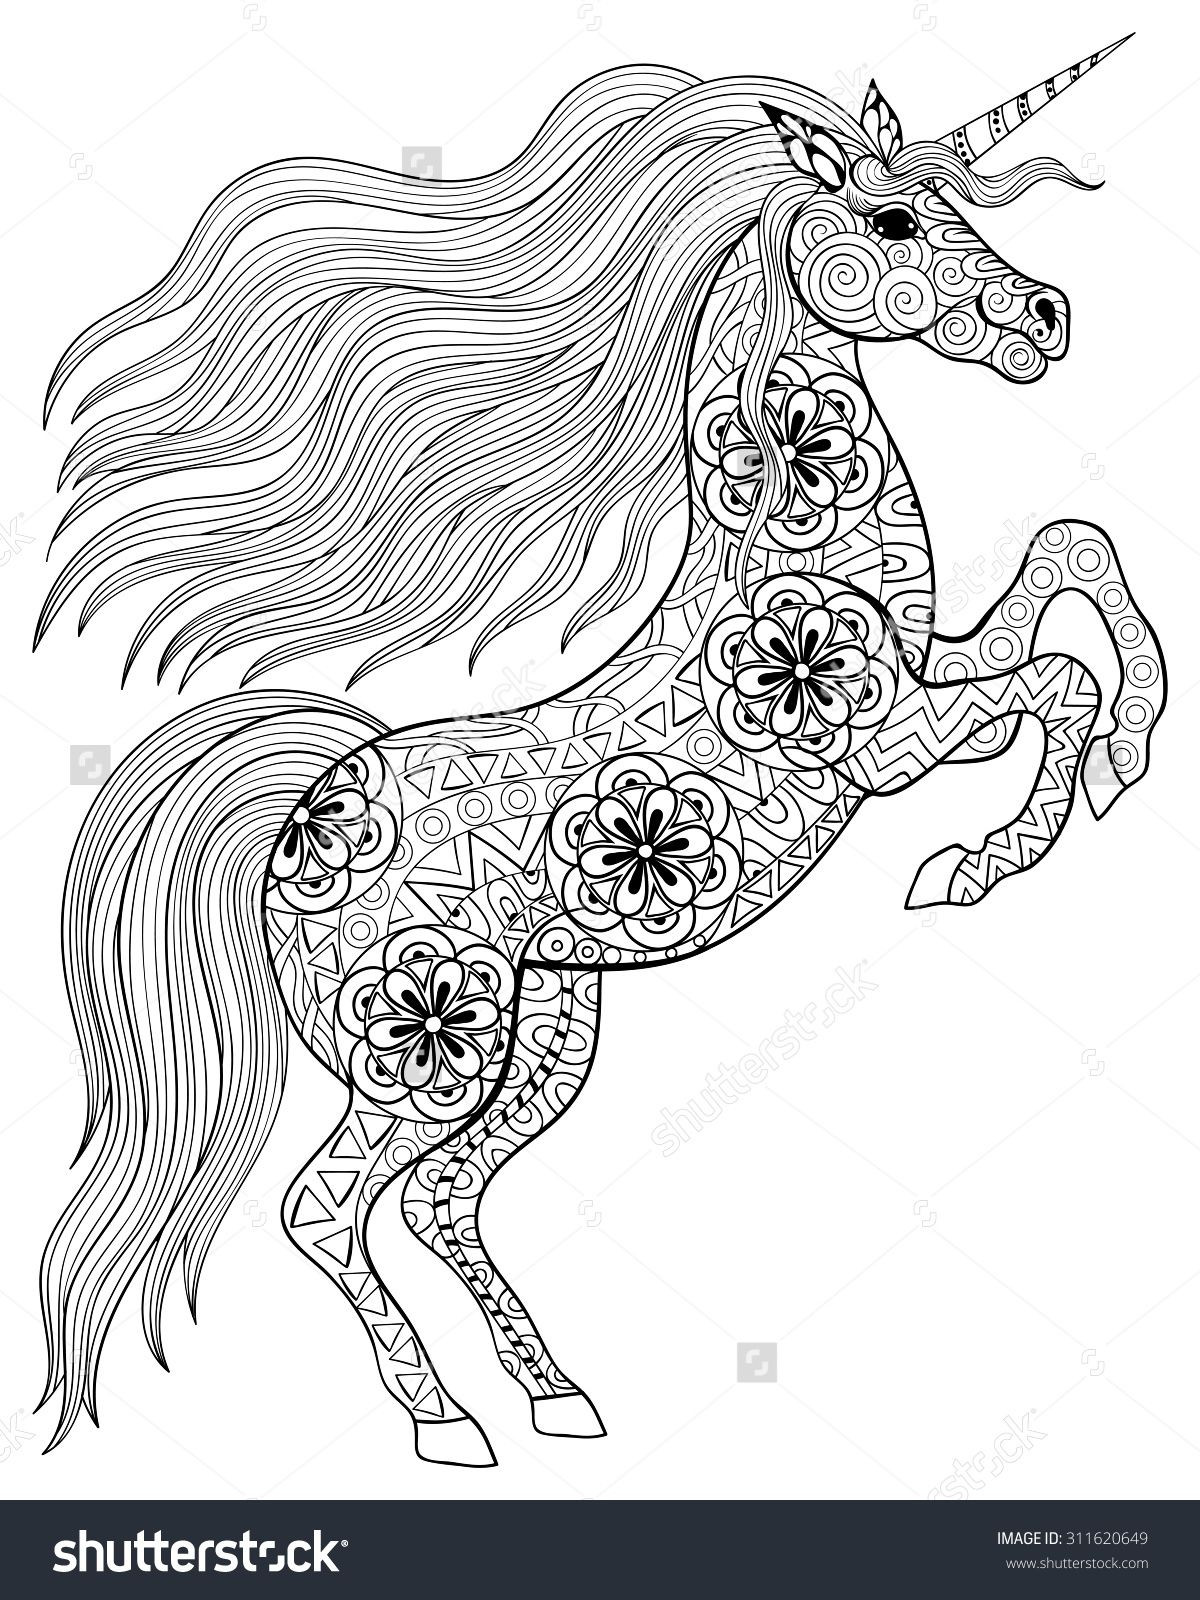 Free Unicorn Coloring Pages For Adults
 Pin by Ulrica Flodin on 1A d z Animals